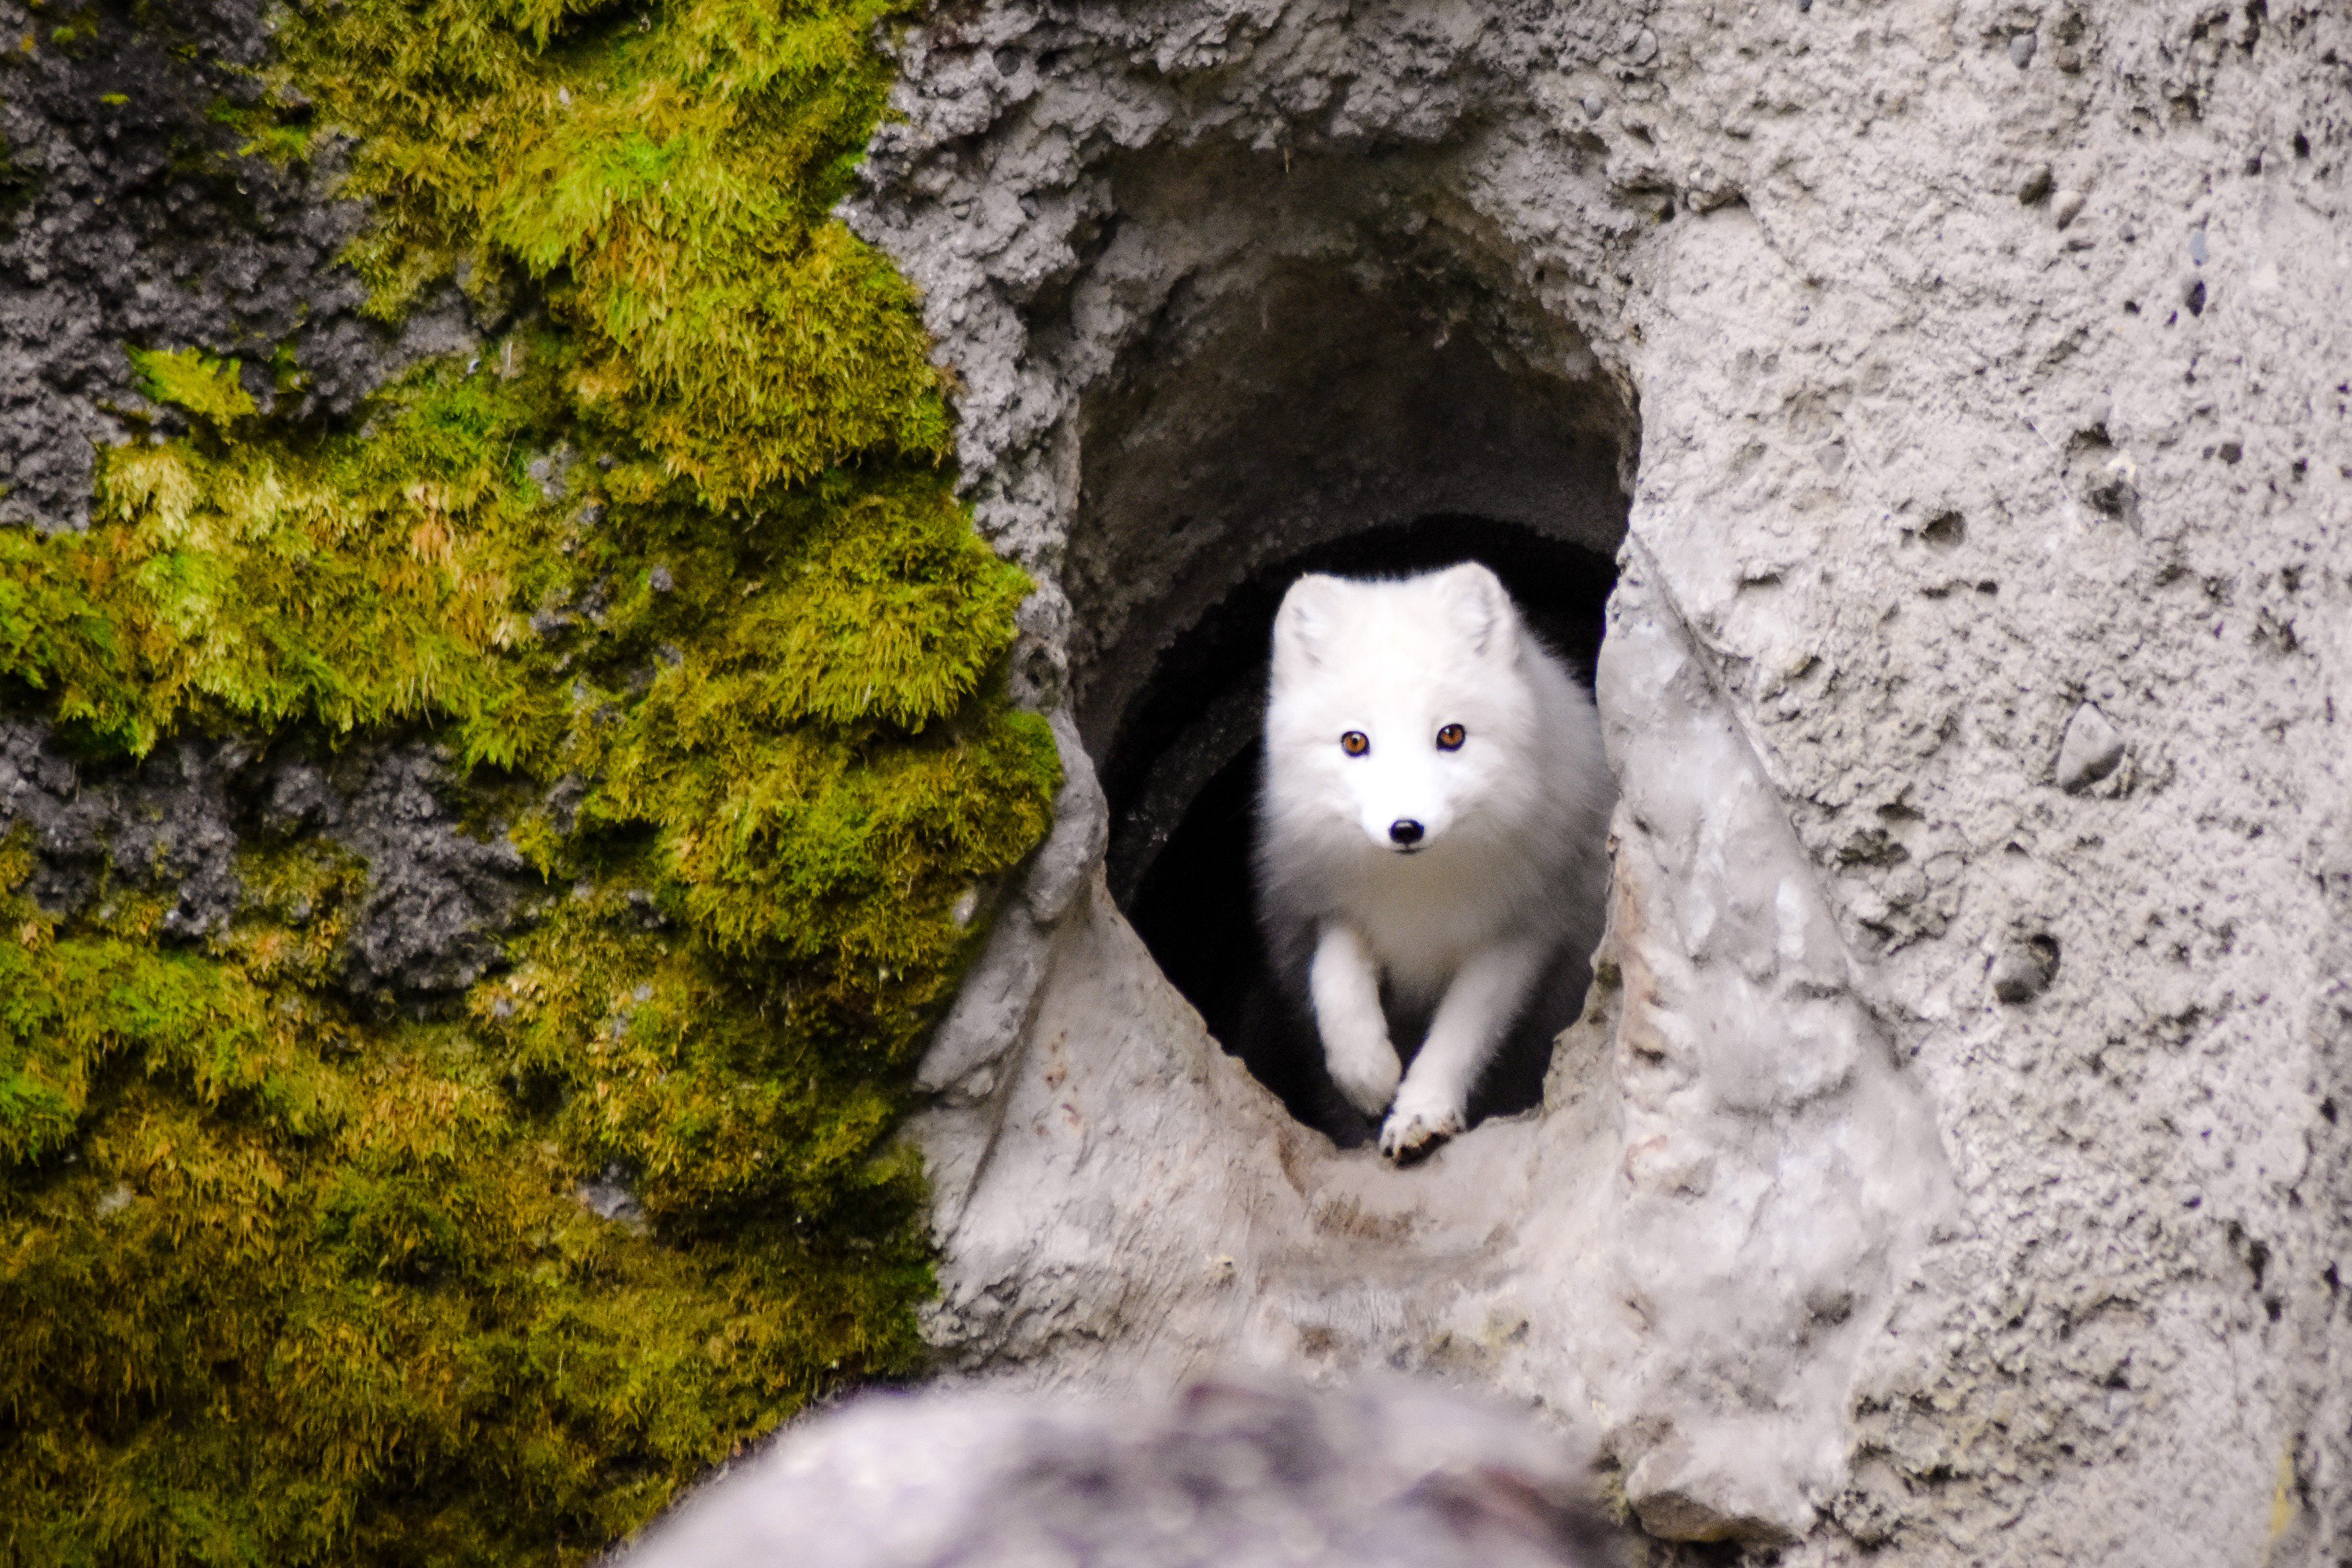 New Arctic fox at Point Defiance Zoo will melt your heart